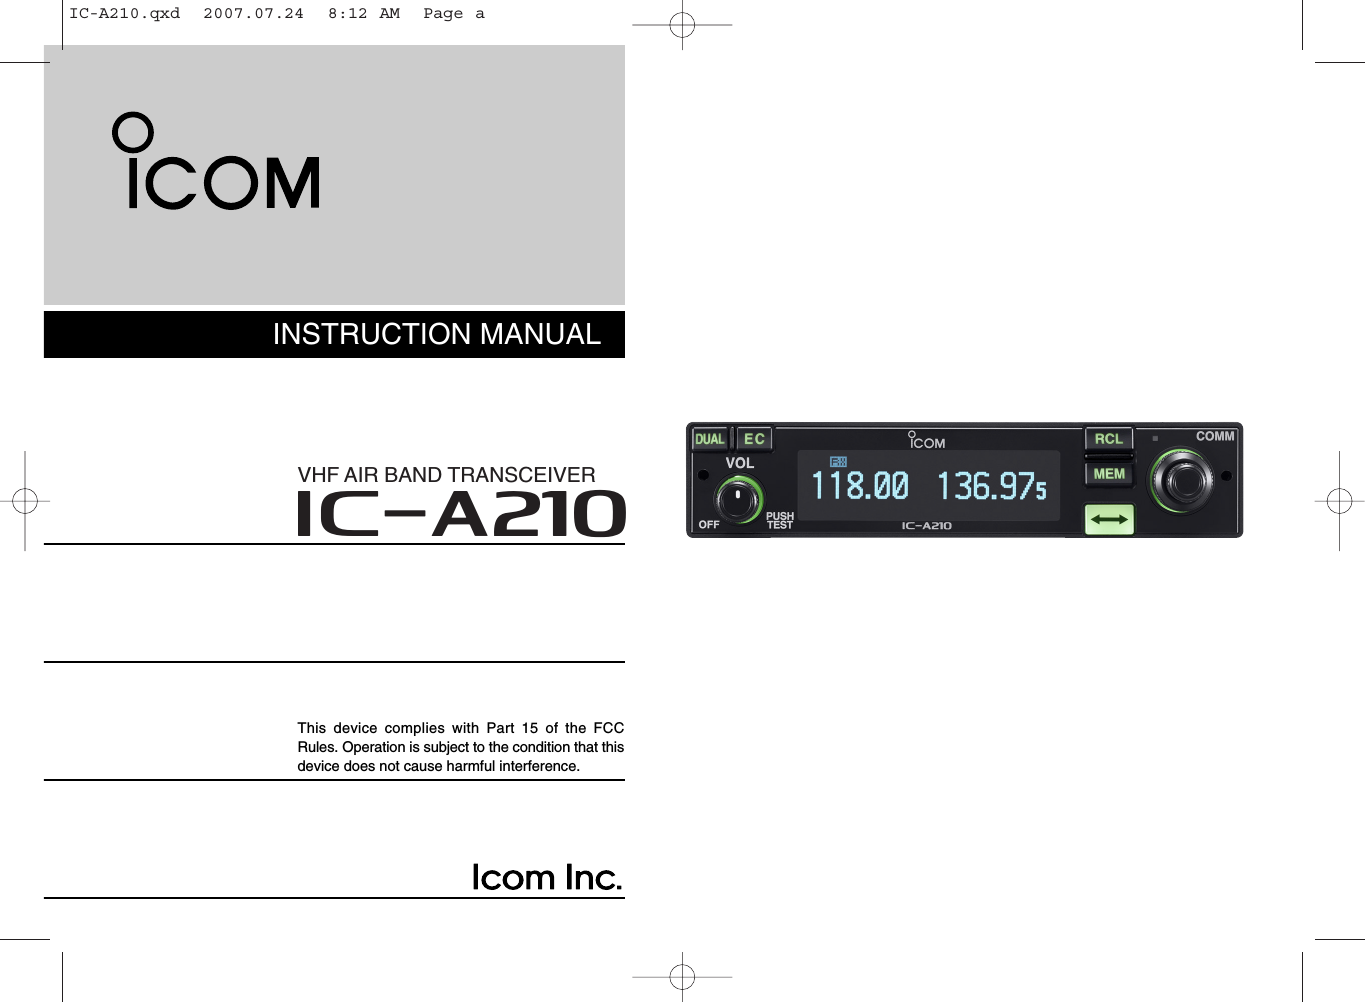 iA210VHF AIR BAND TRANSCEIVERINSTRUCTION MANUALThis device complies with Part 15 of the FCCRules. Operation is subject to the condition that thisdevice does not cause harmful interference.IC-A210.qxd  2007.07.24  8:12 AM  Page a